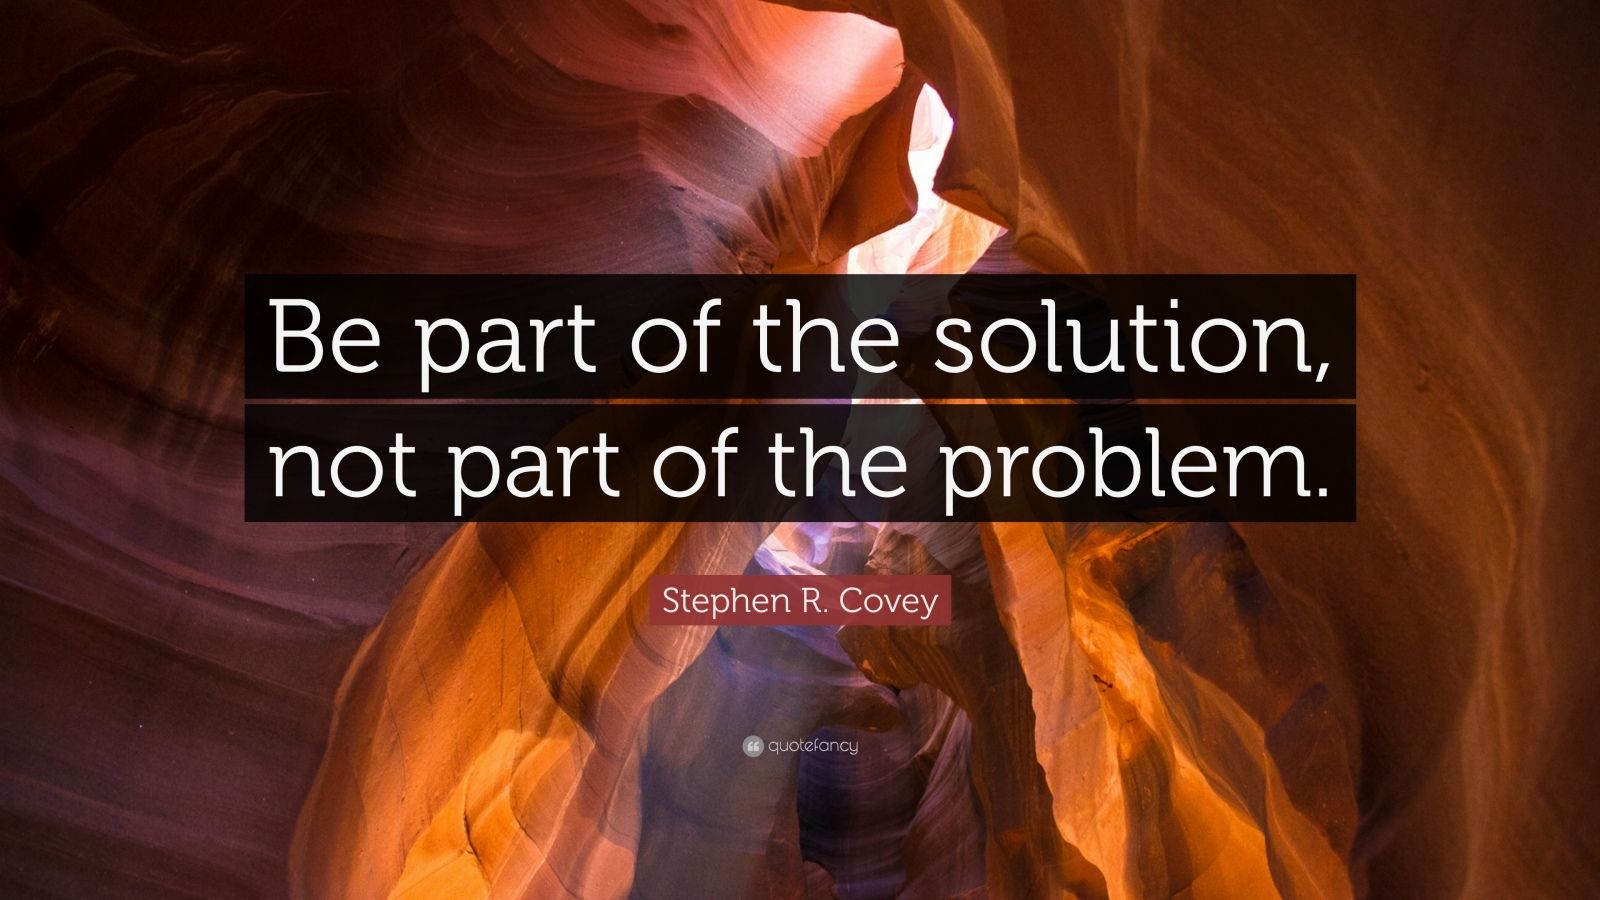 Stephen R Covey Quote “be Part Of The Solution Not Part Of The Problem” 12 Wallpapers 4811